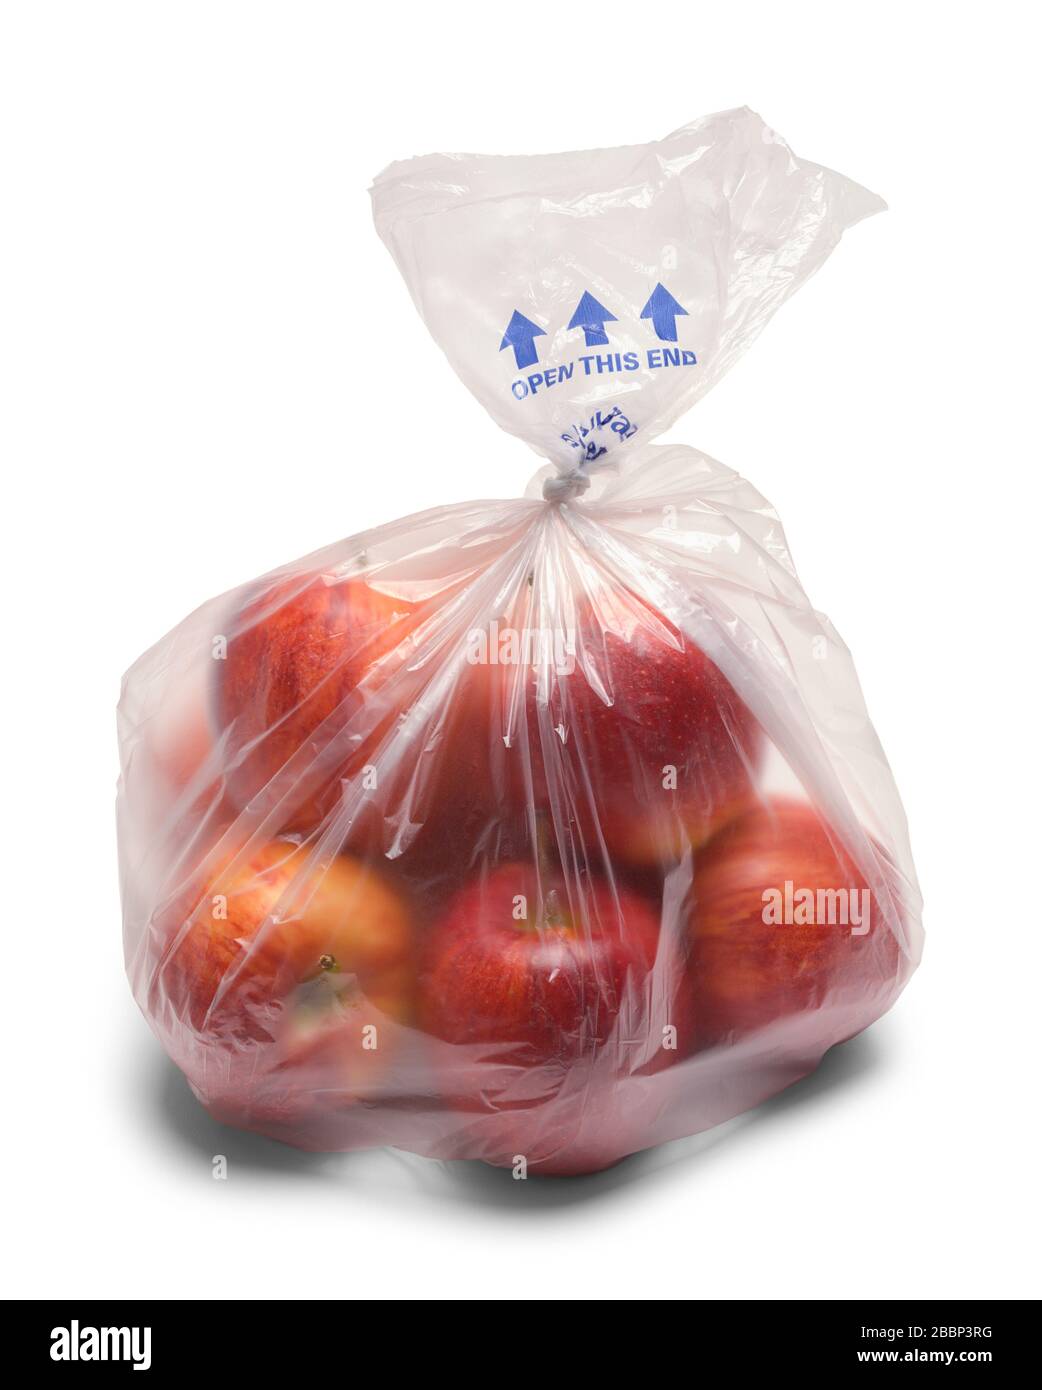 Small Bag of Apples in Plastic Bag Isolated on White. Stock Photo